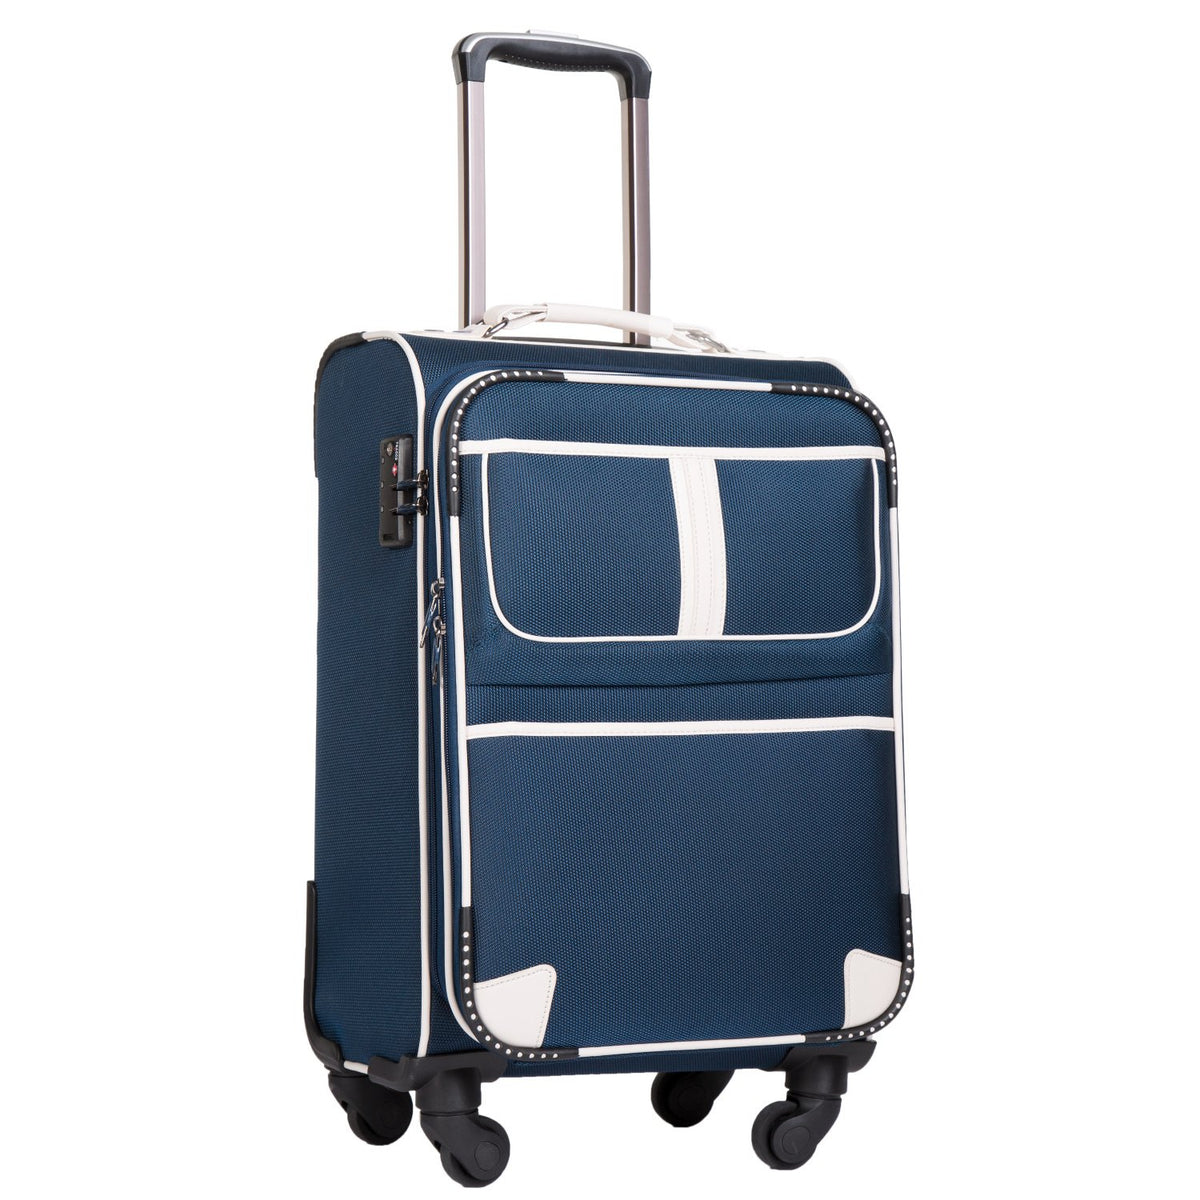 COOLIFE Luggage Sets Carry On Luggage Suitcase with Front Pocket